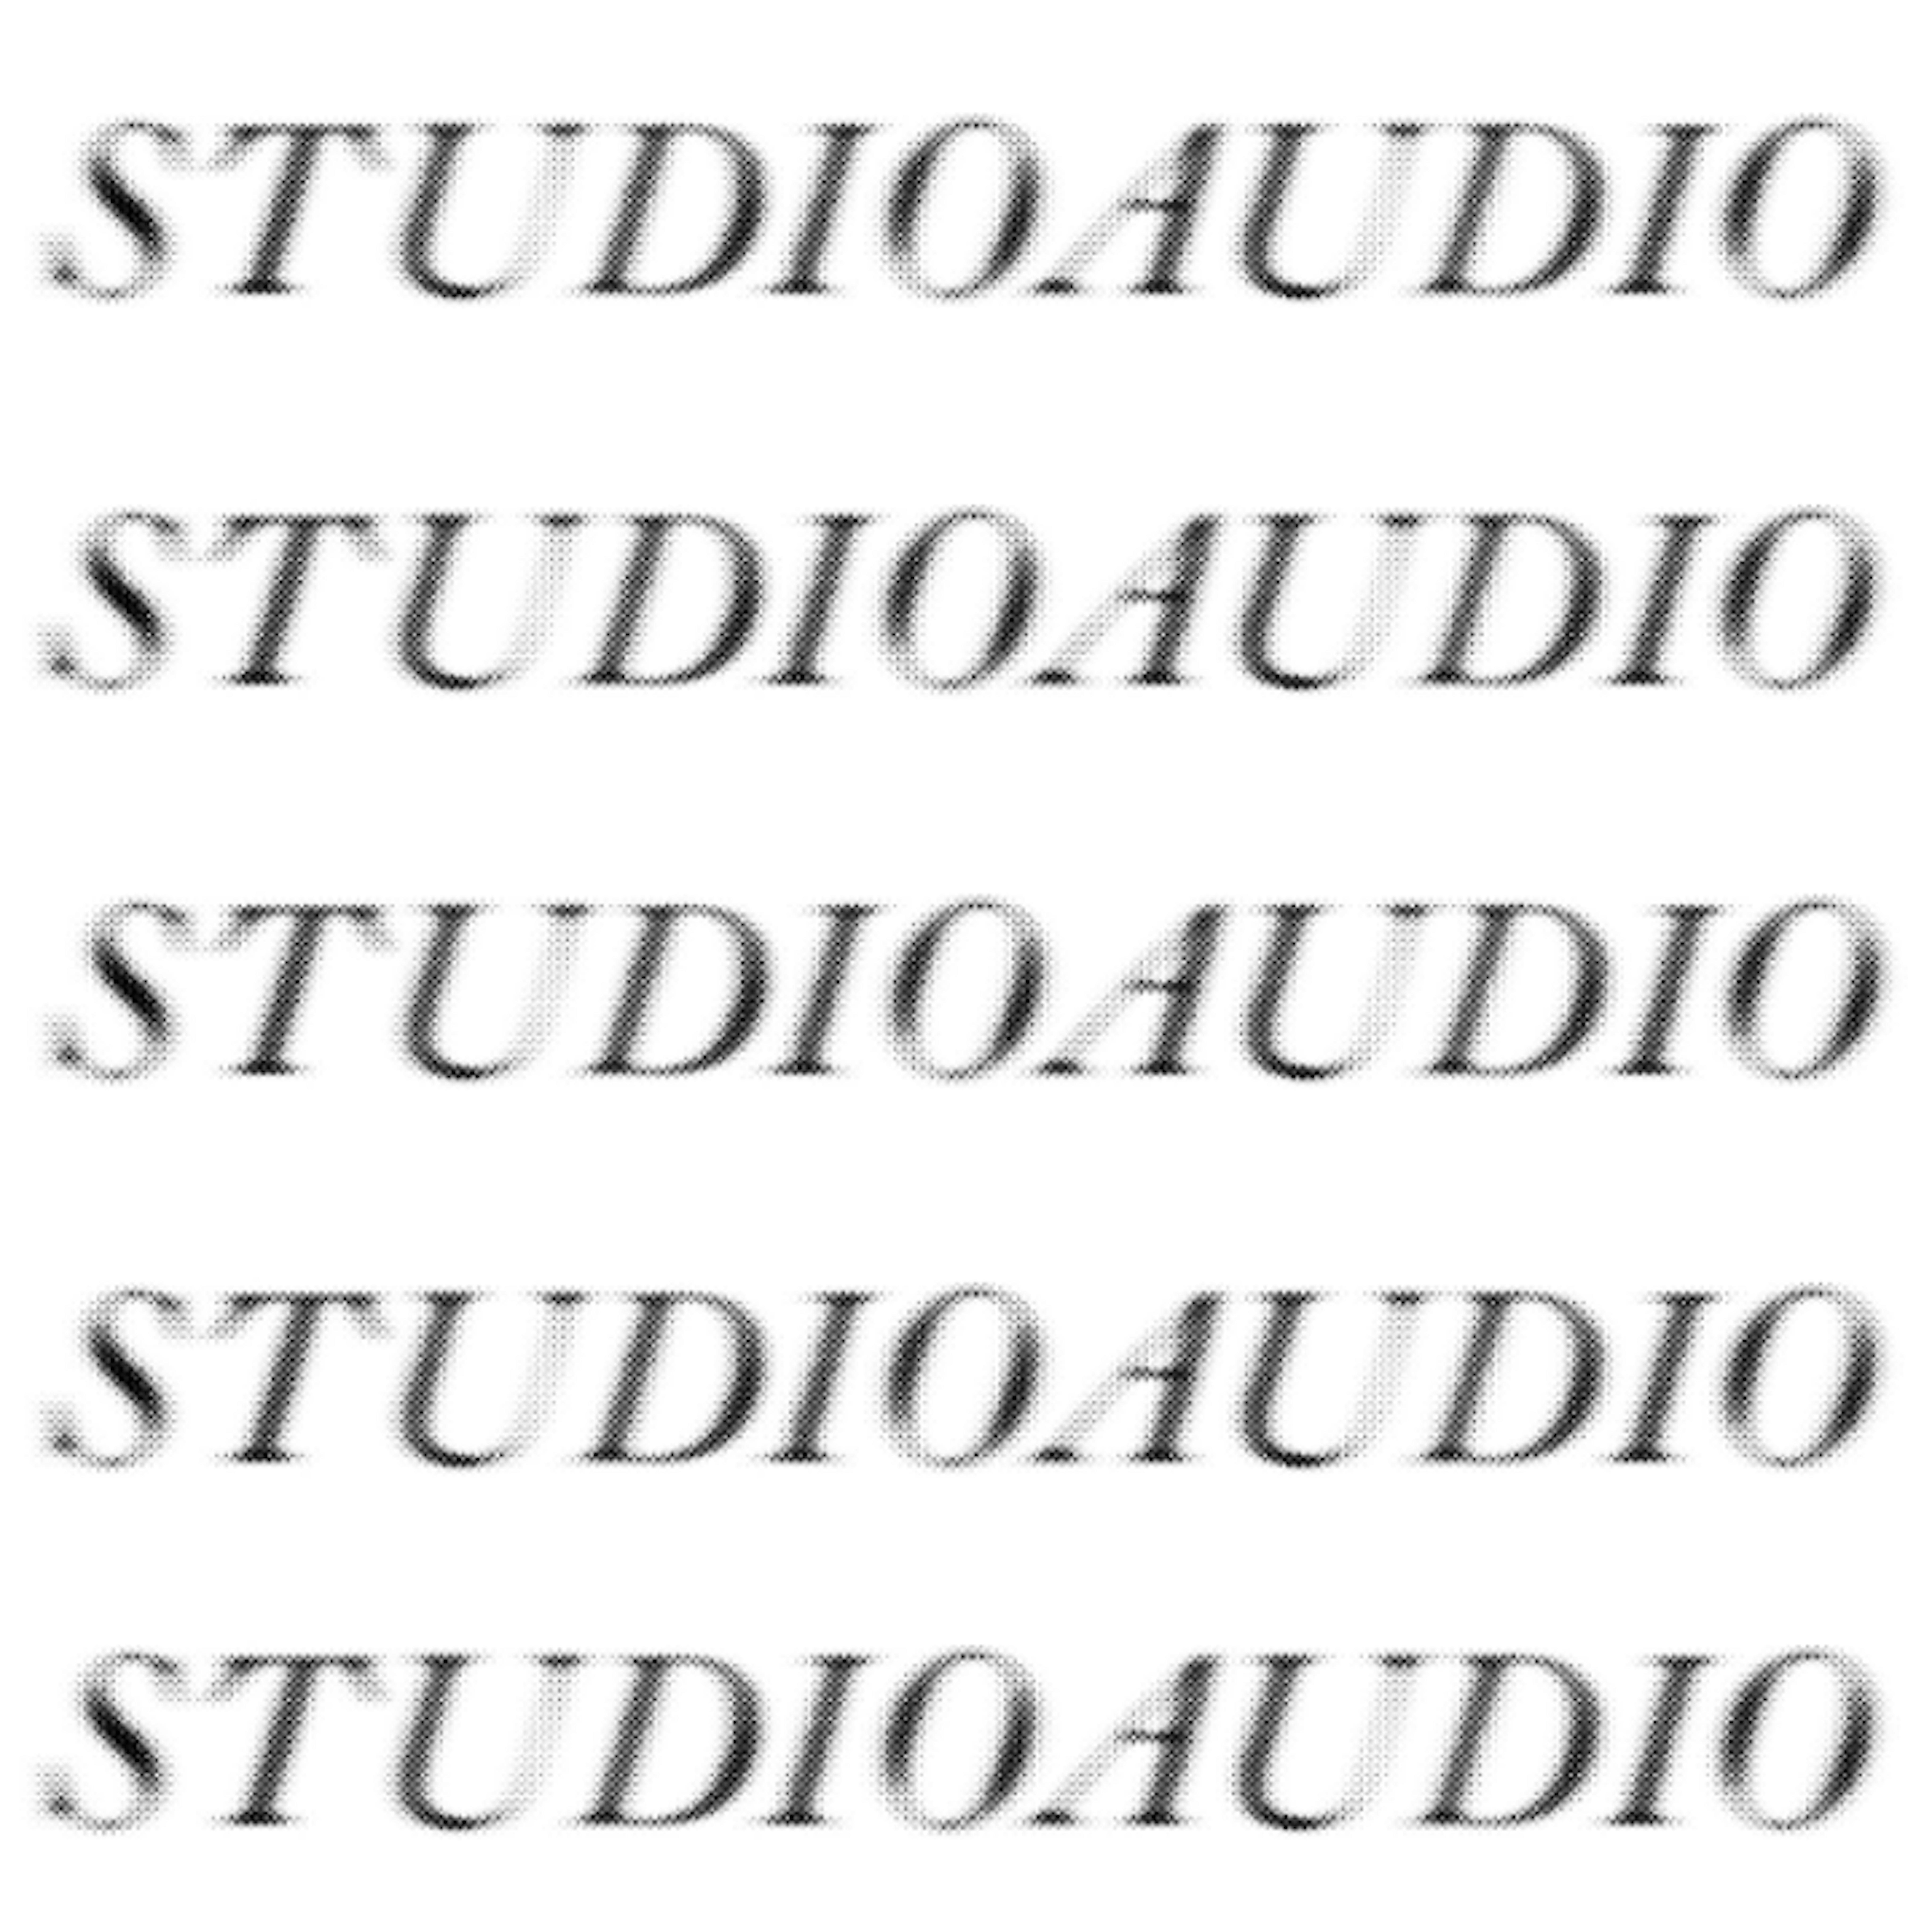 The phrase 'Studio Audio' in black and white repeats on a white background. The typeface is slightly fuzzy. 